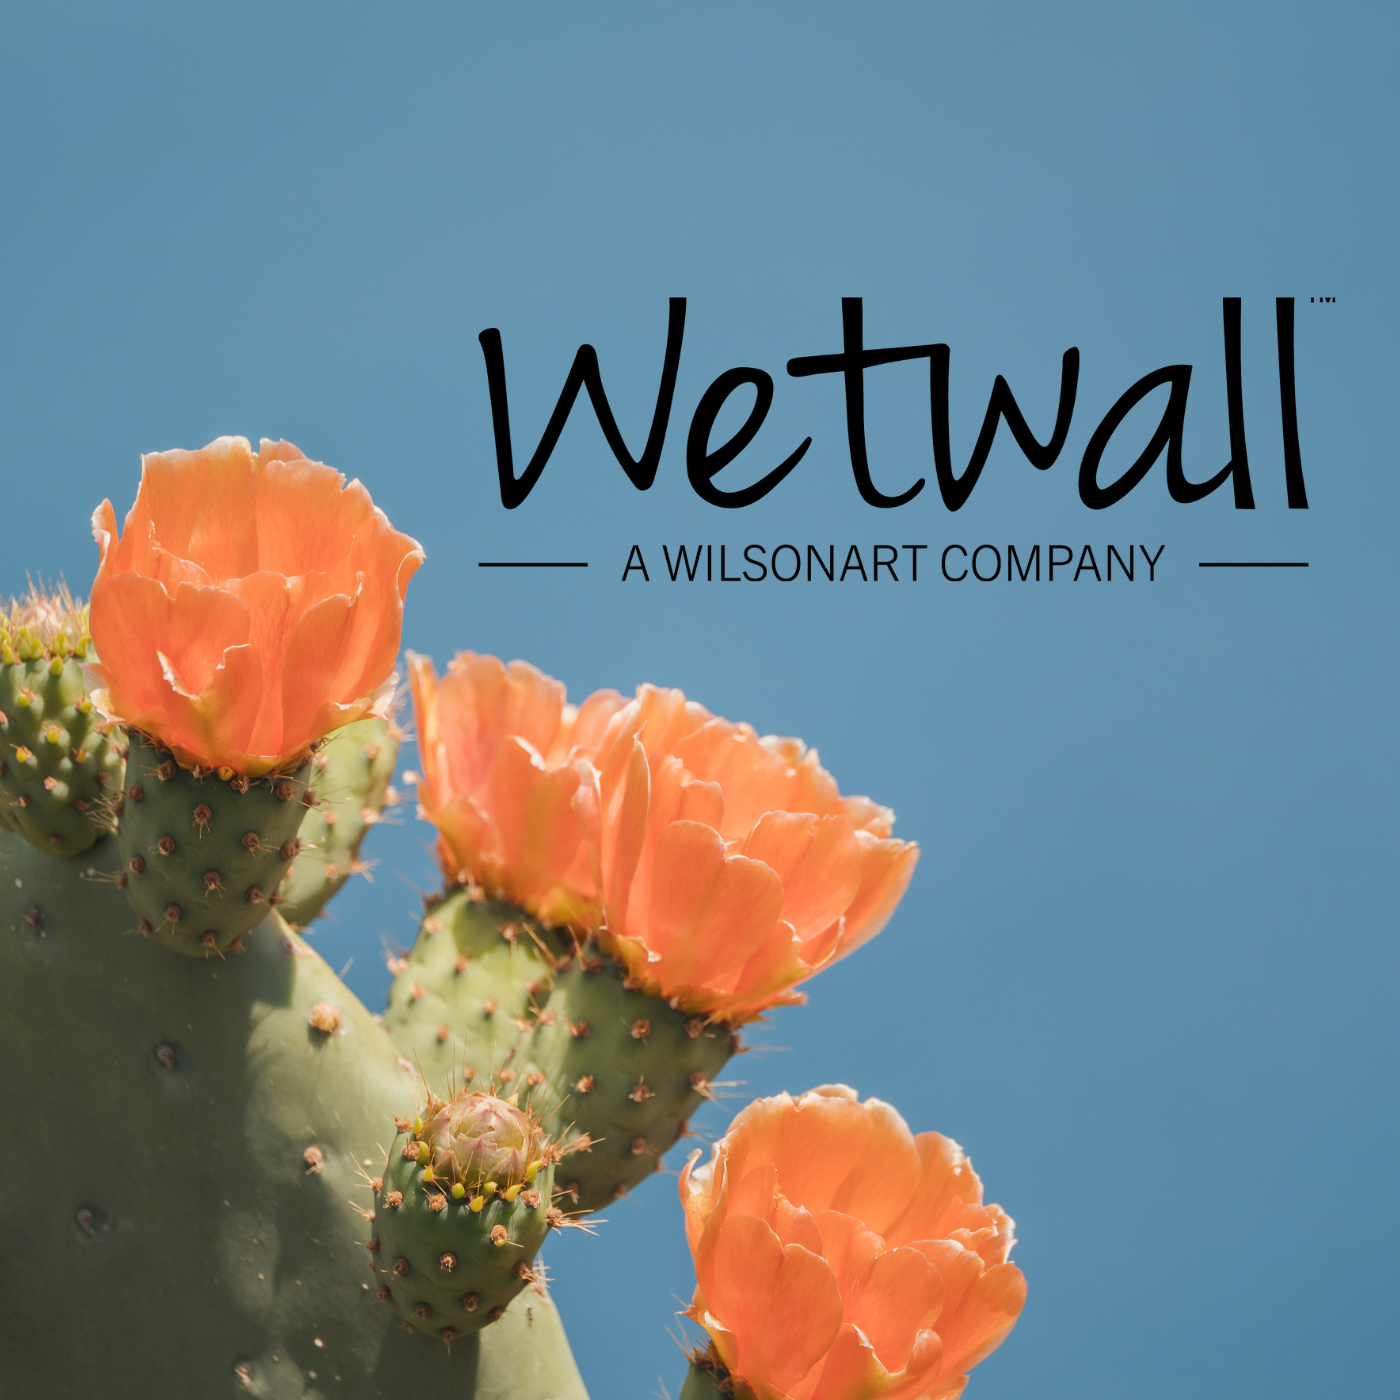 5 Reasons to use Wilsonart's Wetwall instead of traditional tiling PoshHaus